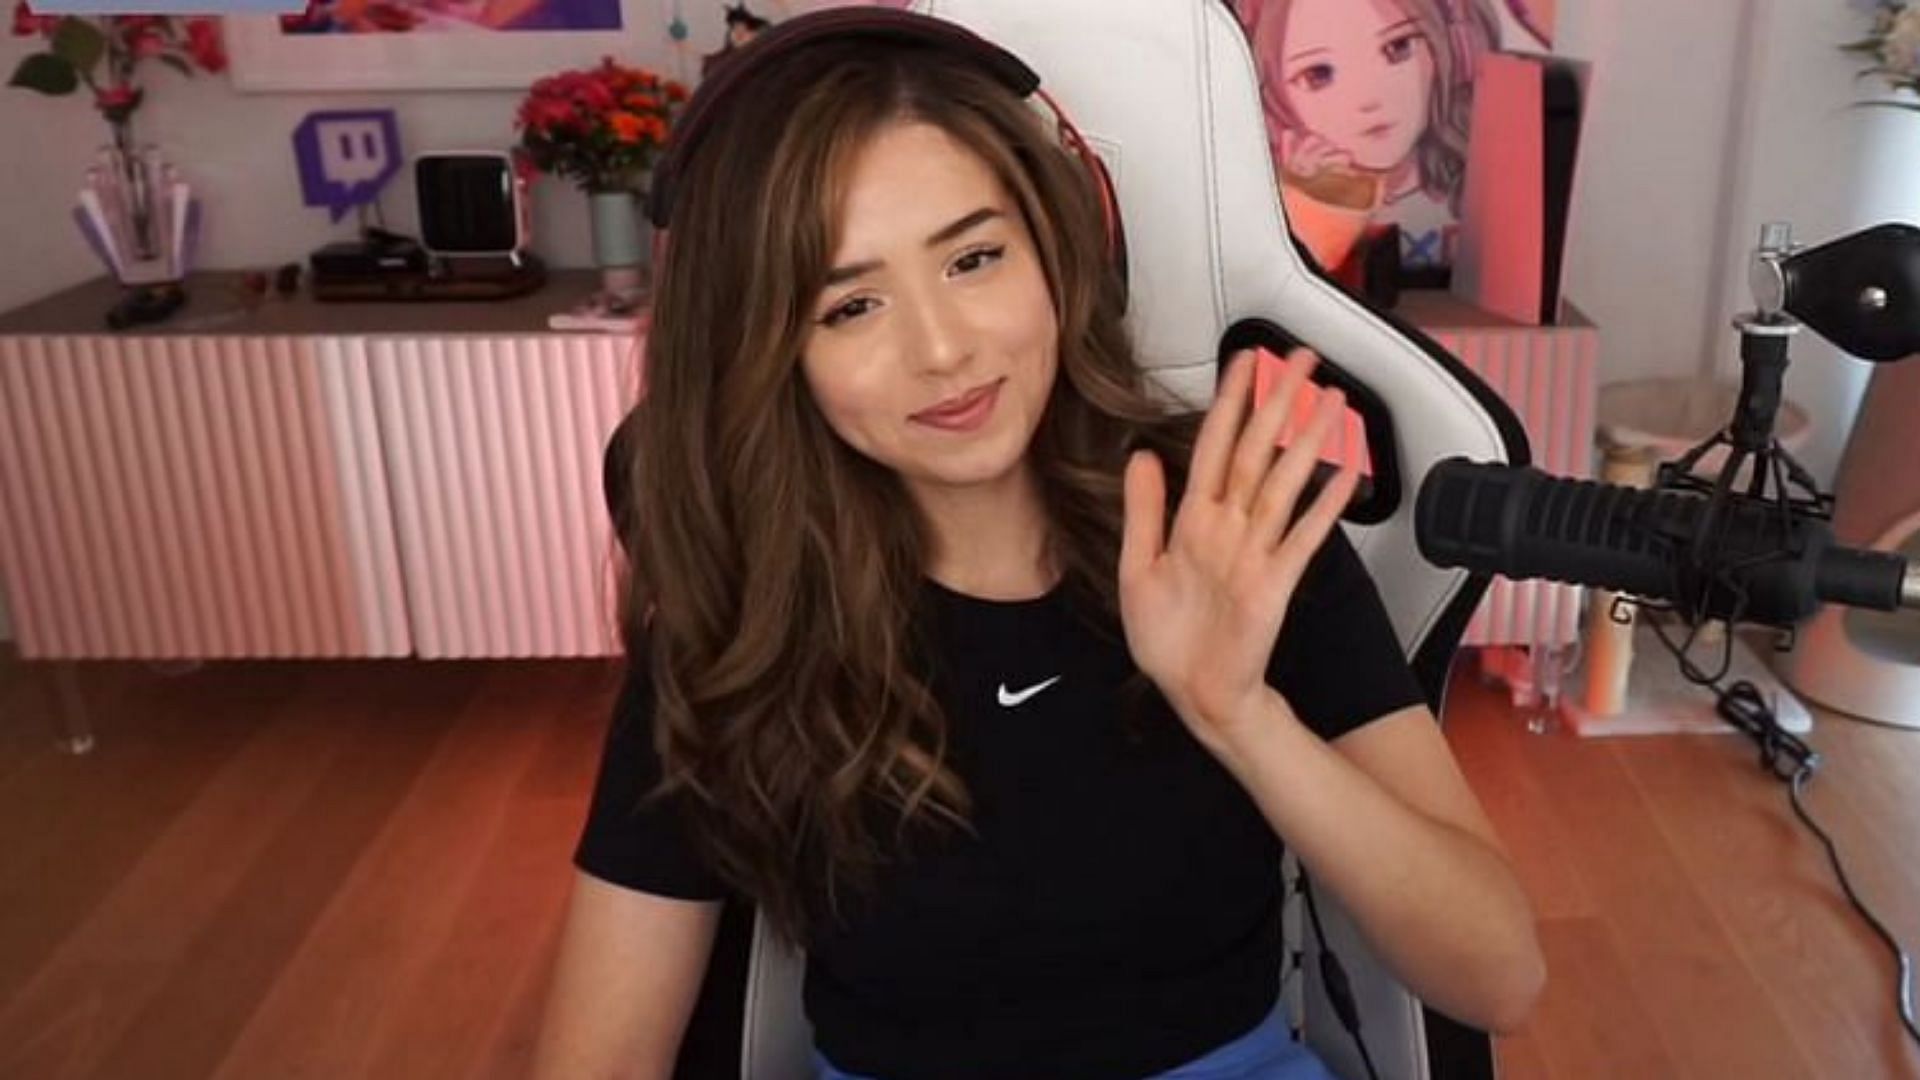 The streamer is looking to help student gamers in her community (Image via Pokimane/YouTube)